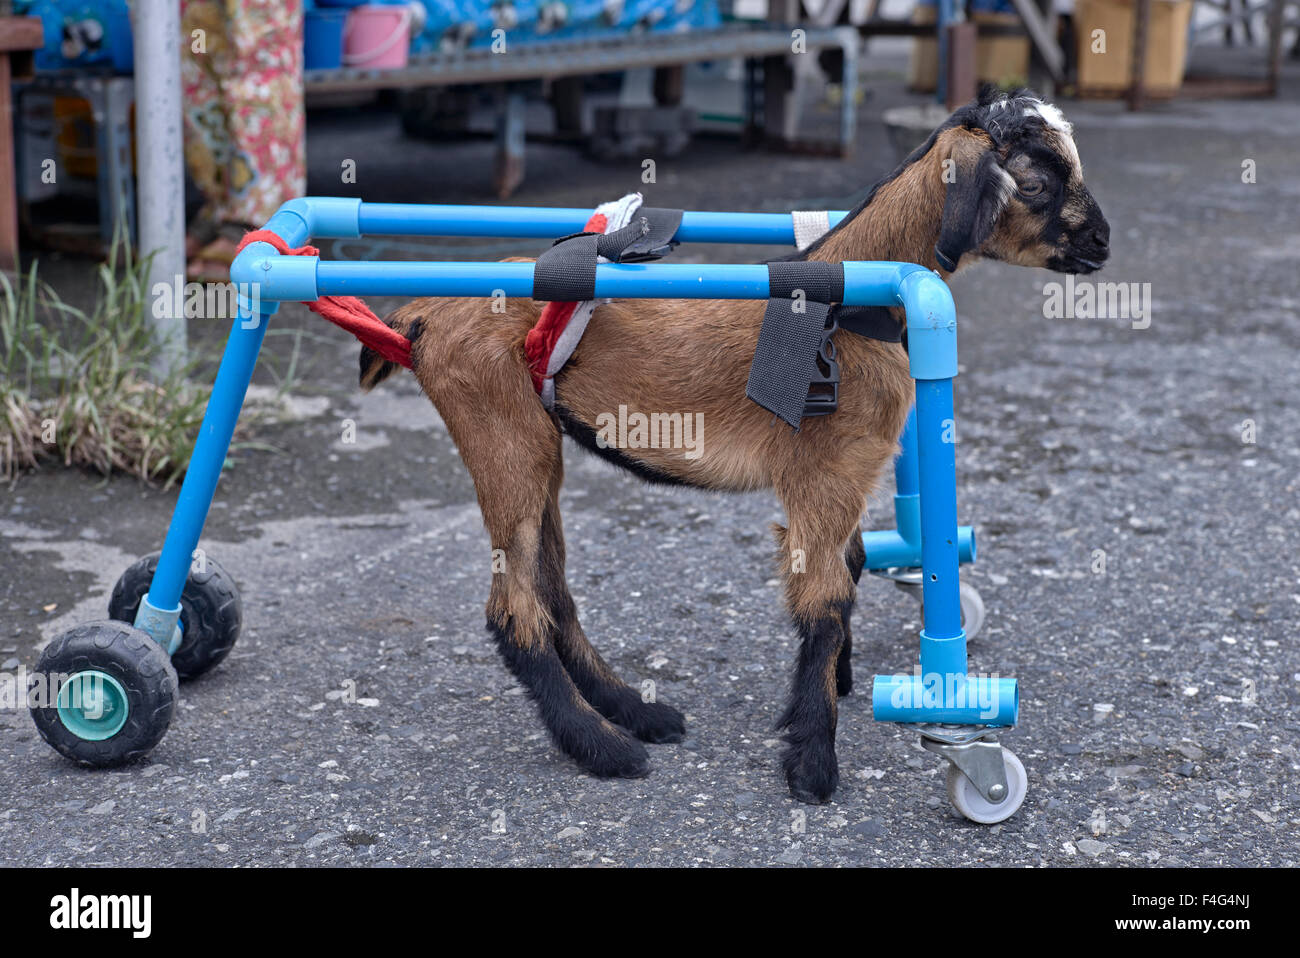 Disabled animal. Kid goat in homemade walking harness. Thailand S. E. Asia  Stock Photo - Alamy